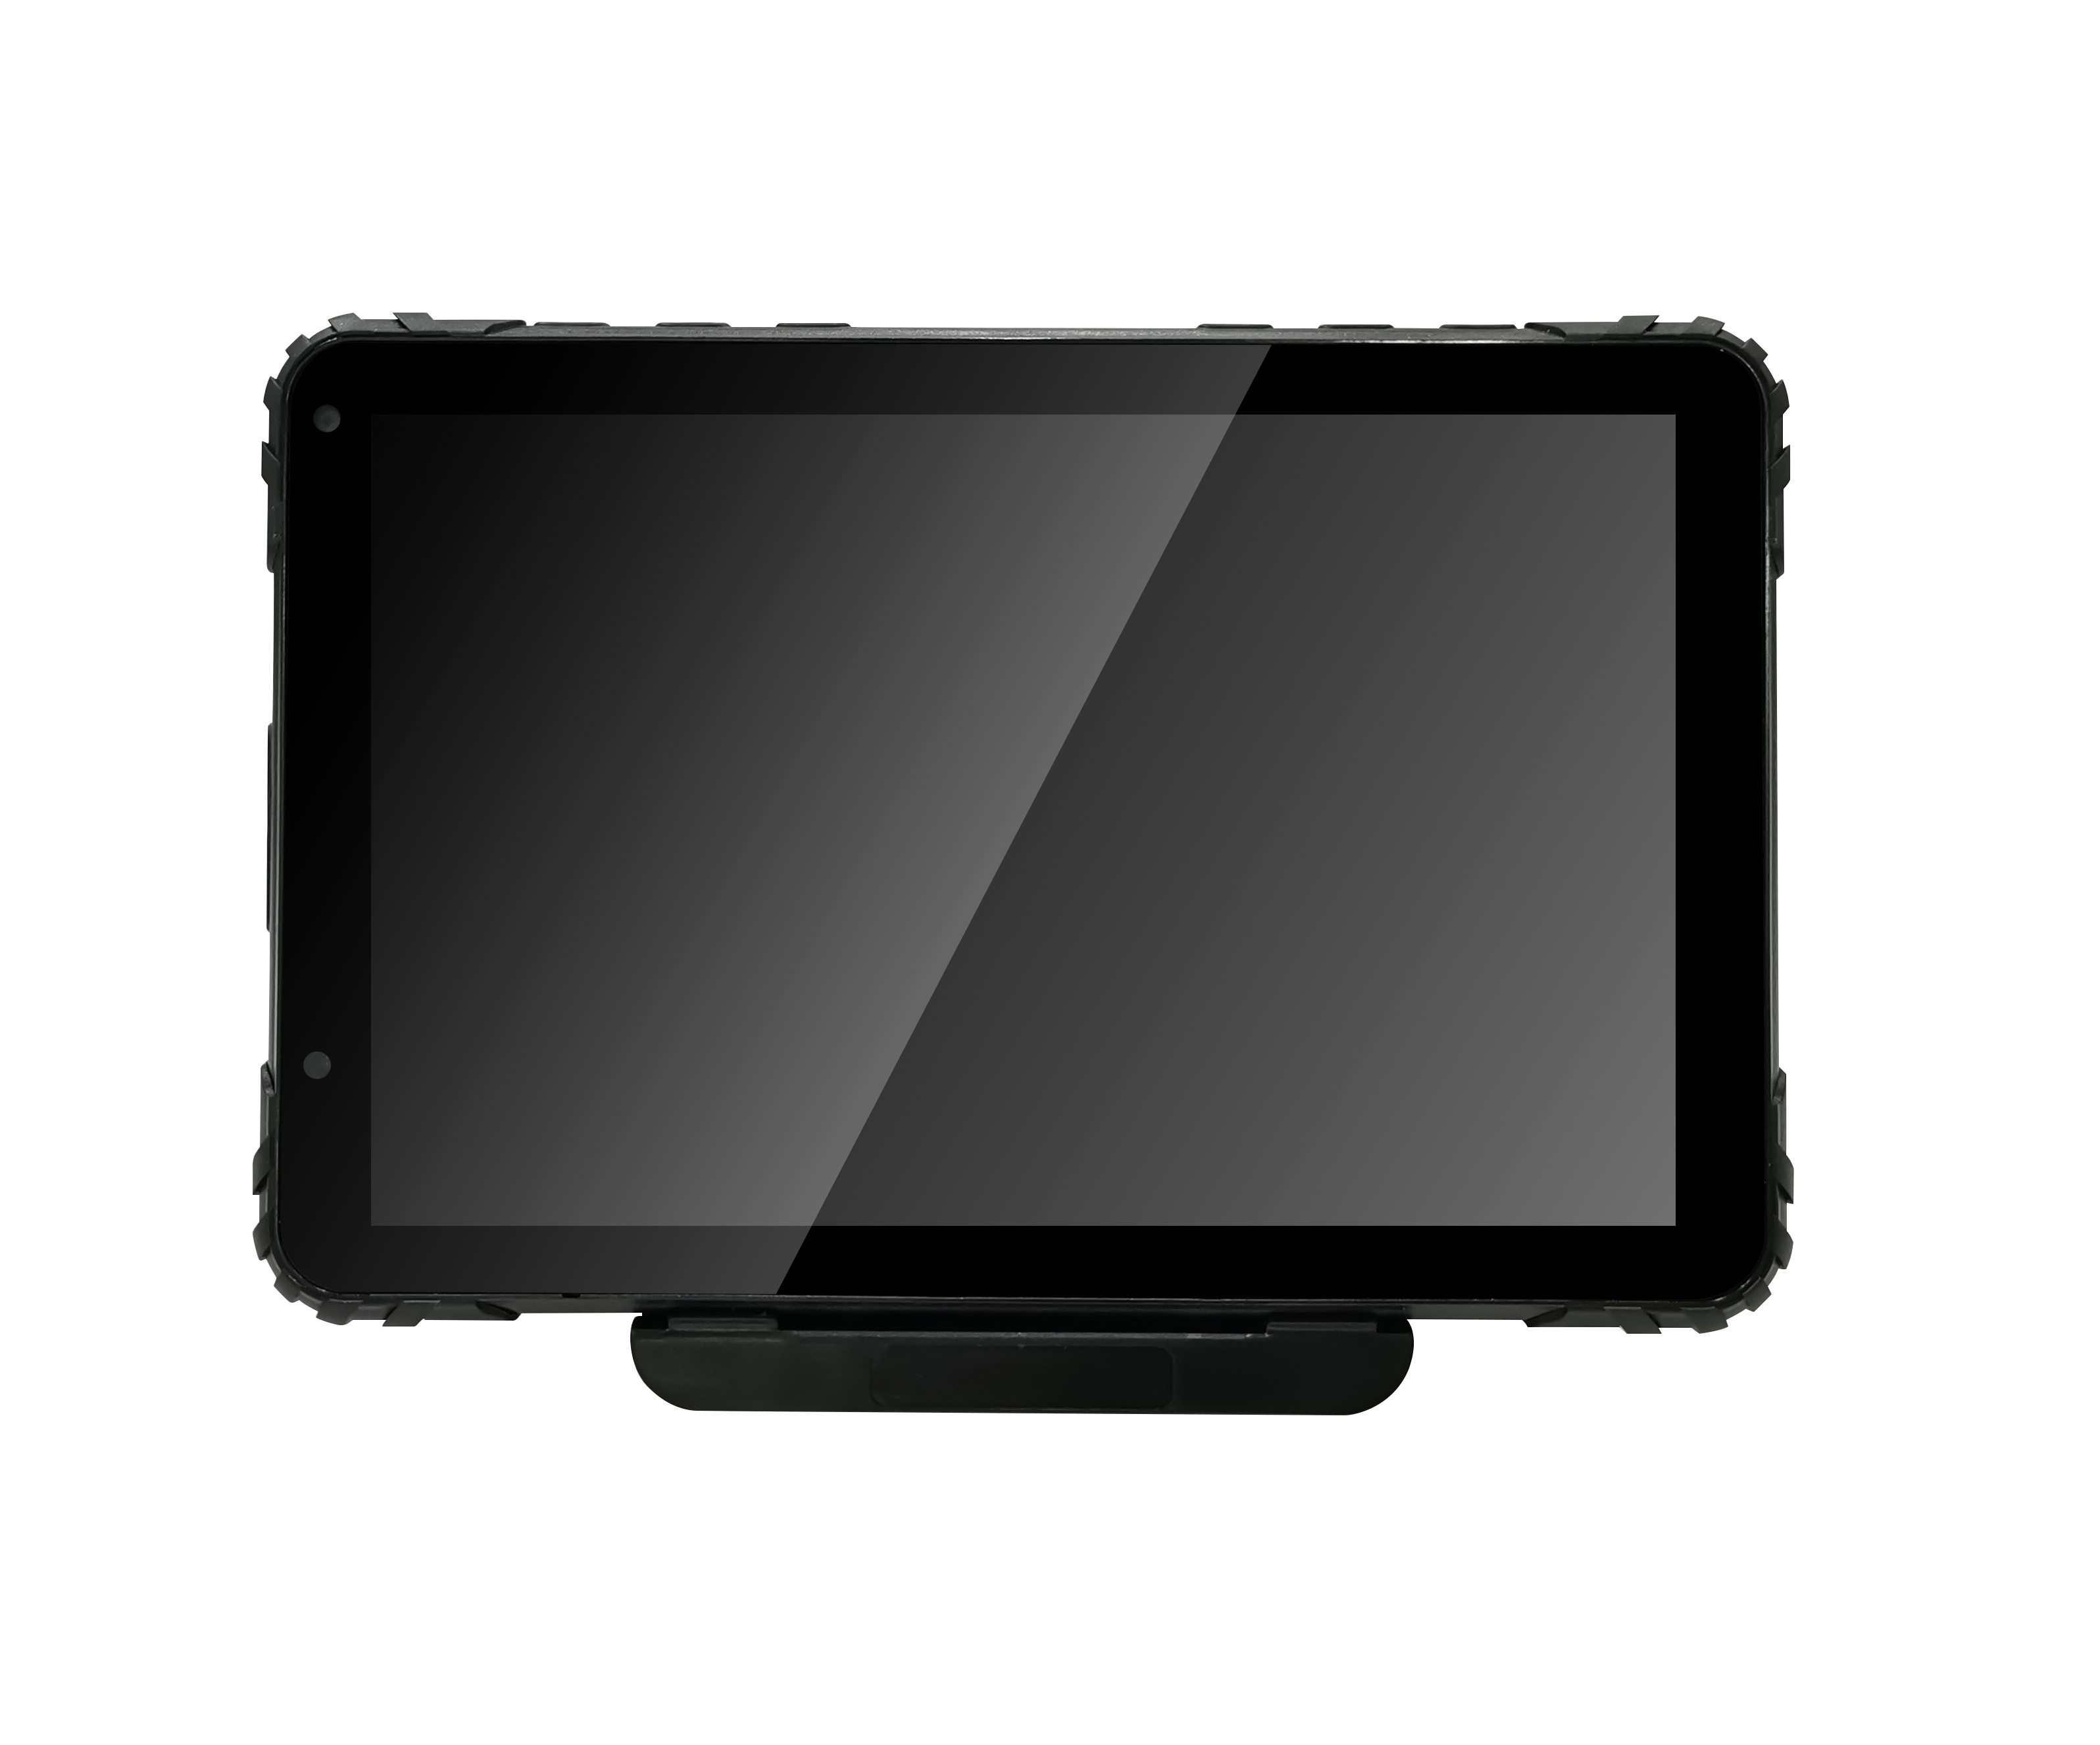 MDT865 8" Android Tablet (PTCRB)